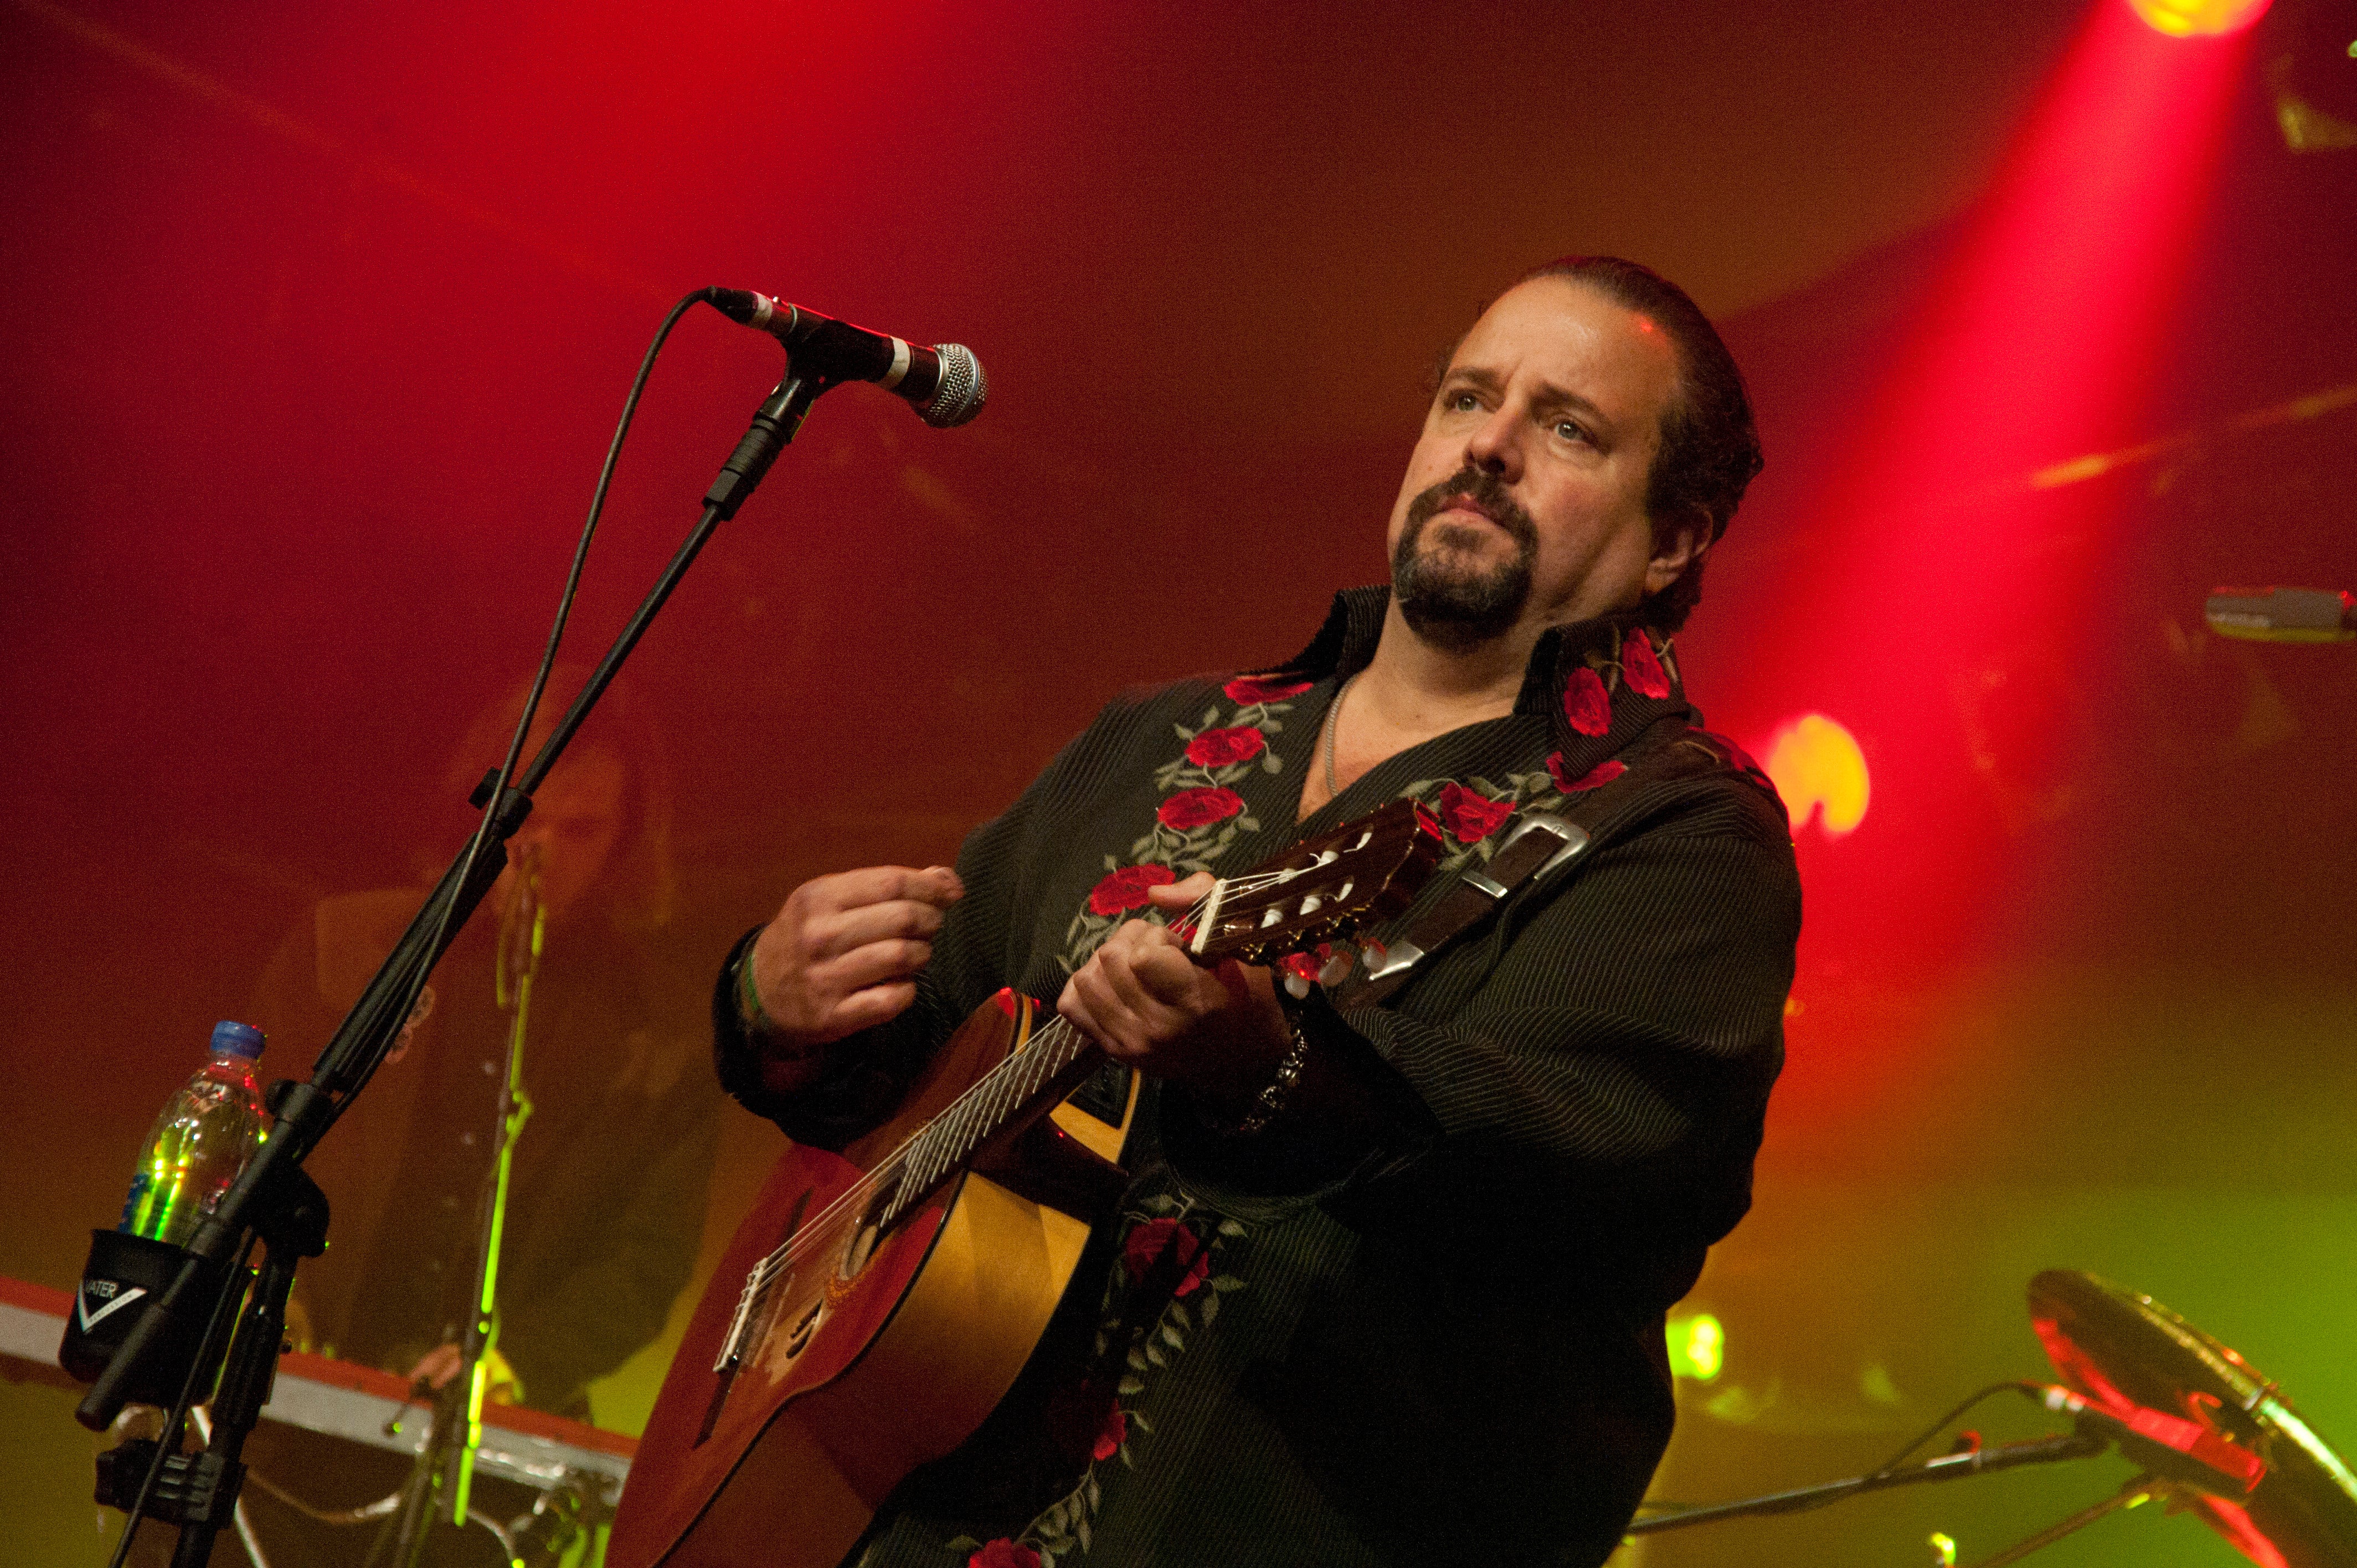 Raul Malo (of The Mavericks) with Seth Walker at Birchmere